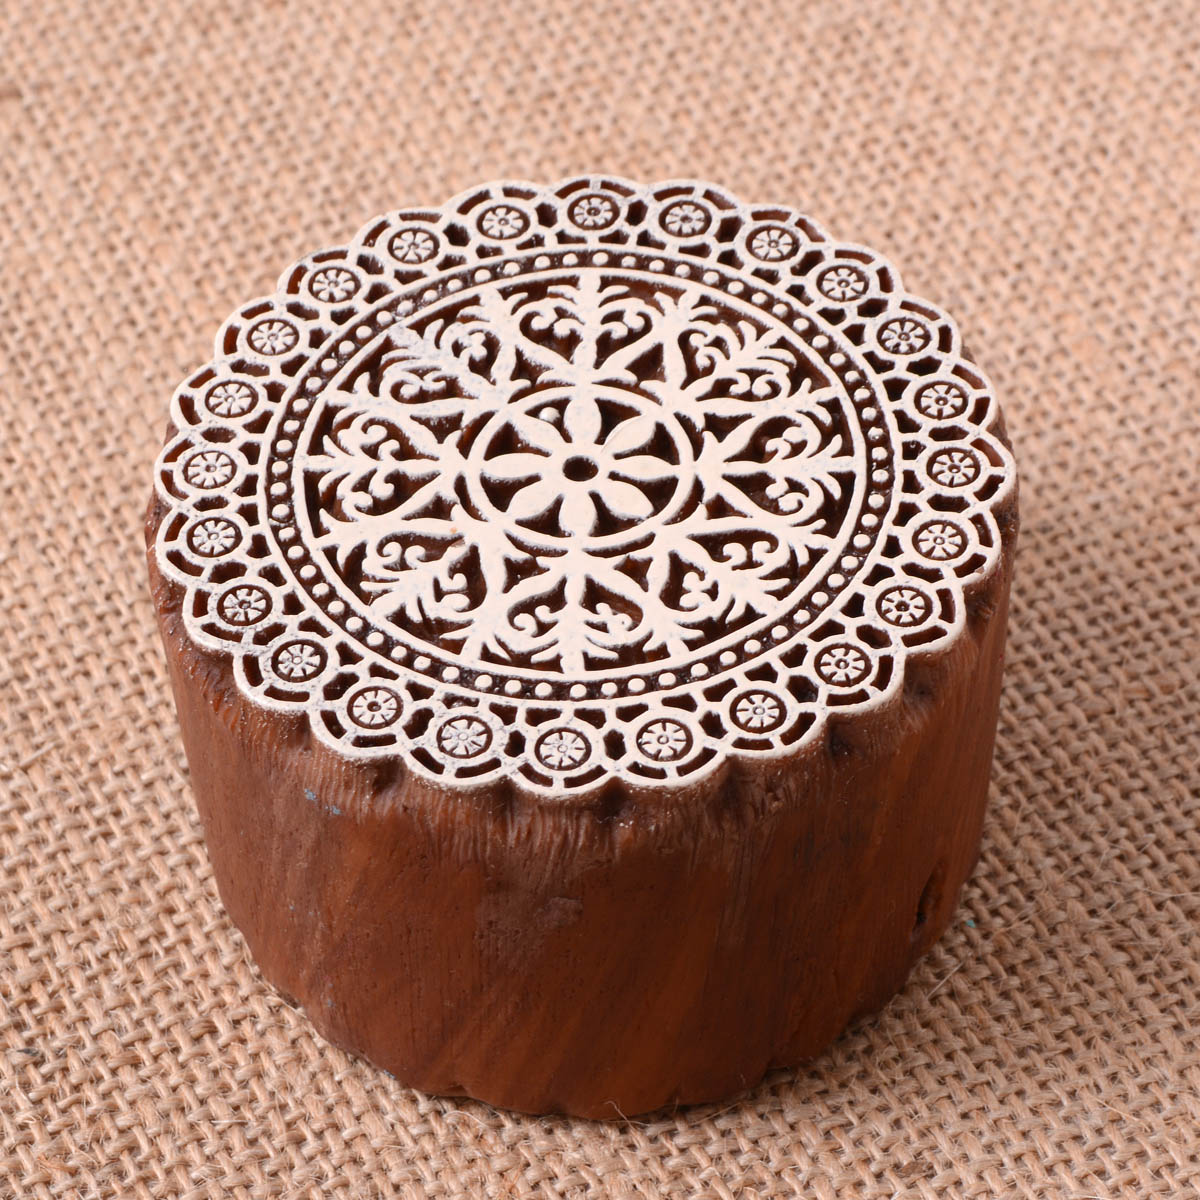 Fabric Creations™ Block Printing Stamps - Medium - Lace Doily